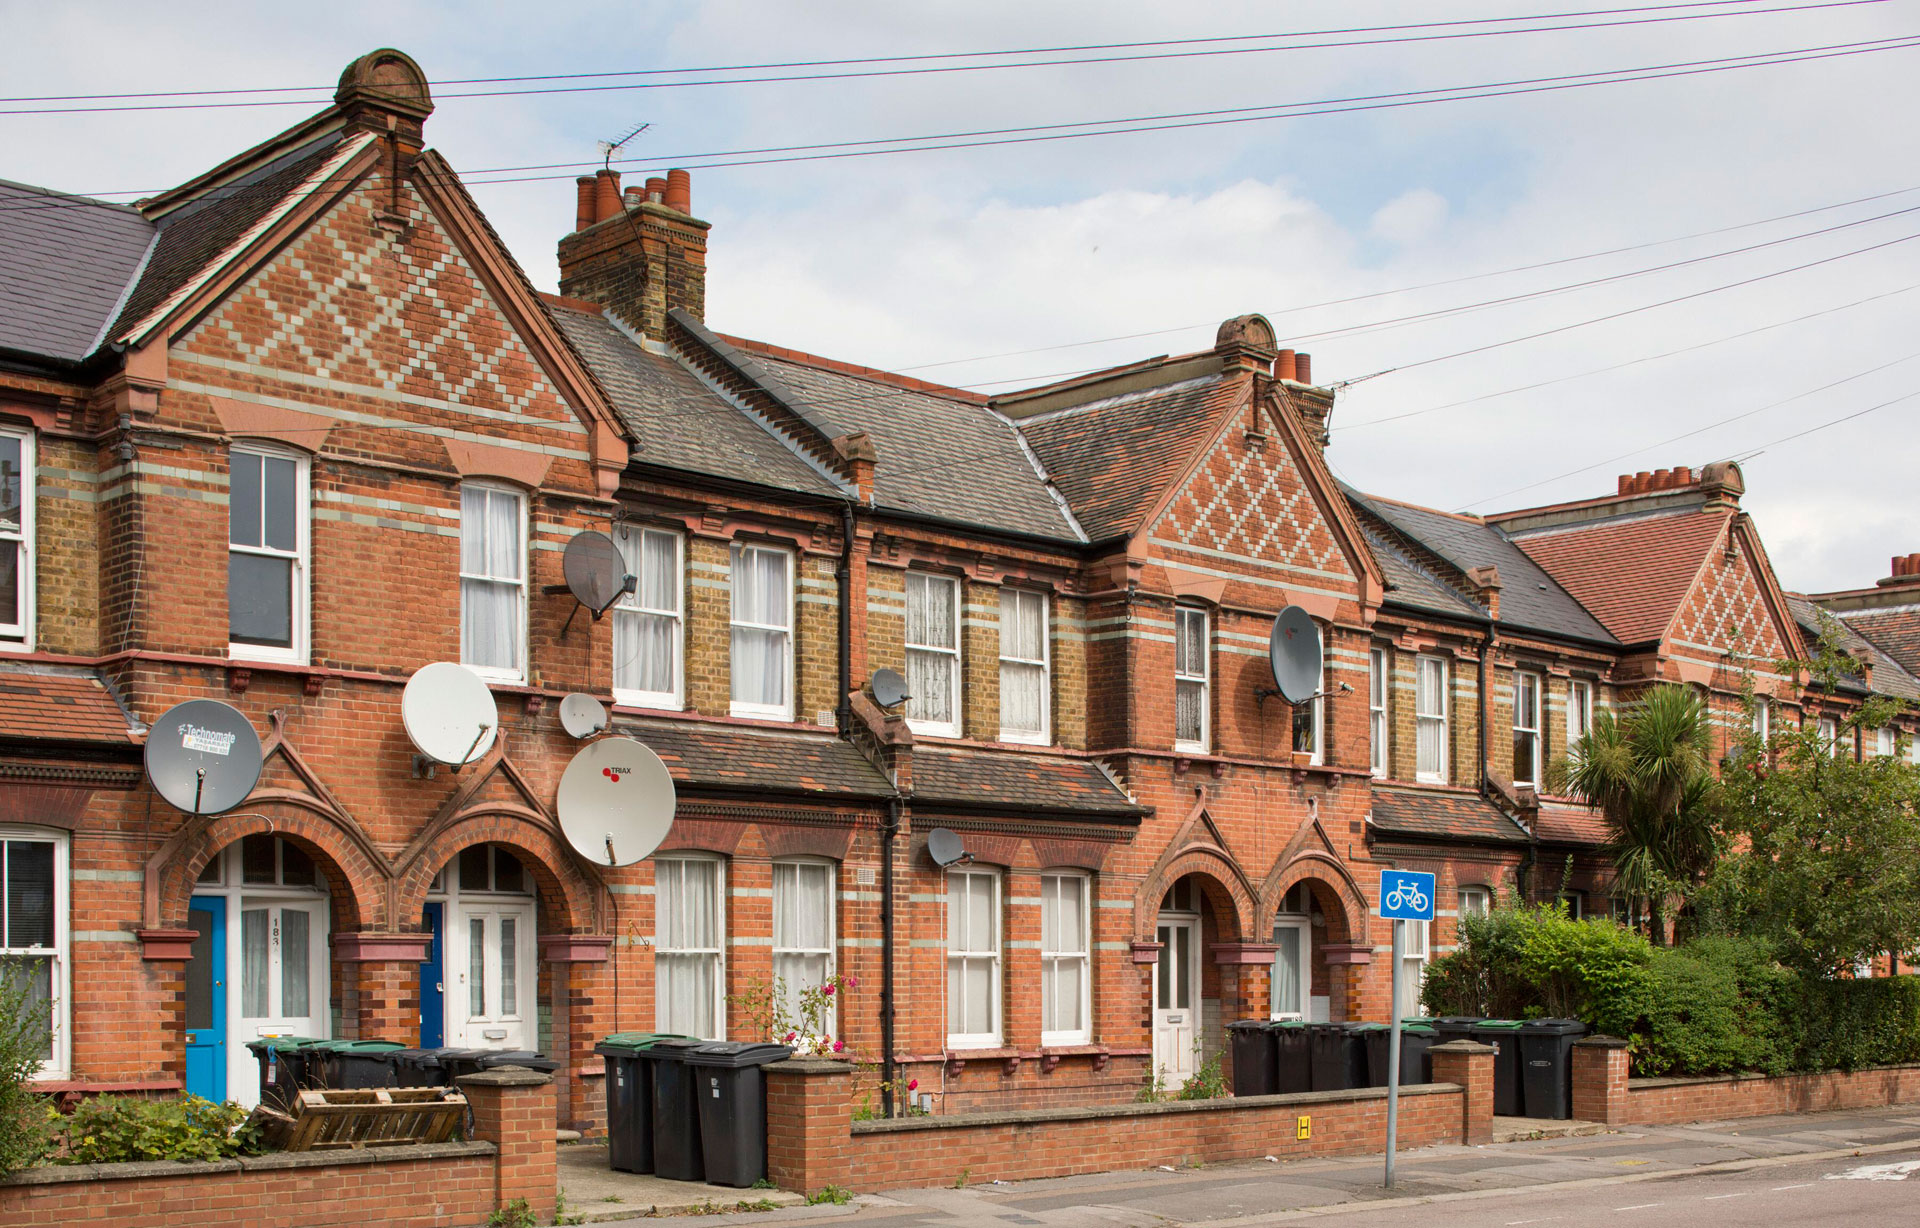 Houses in Noel Park conservation area, Haringey, London